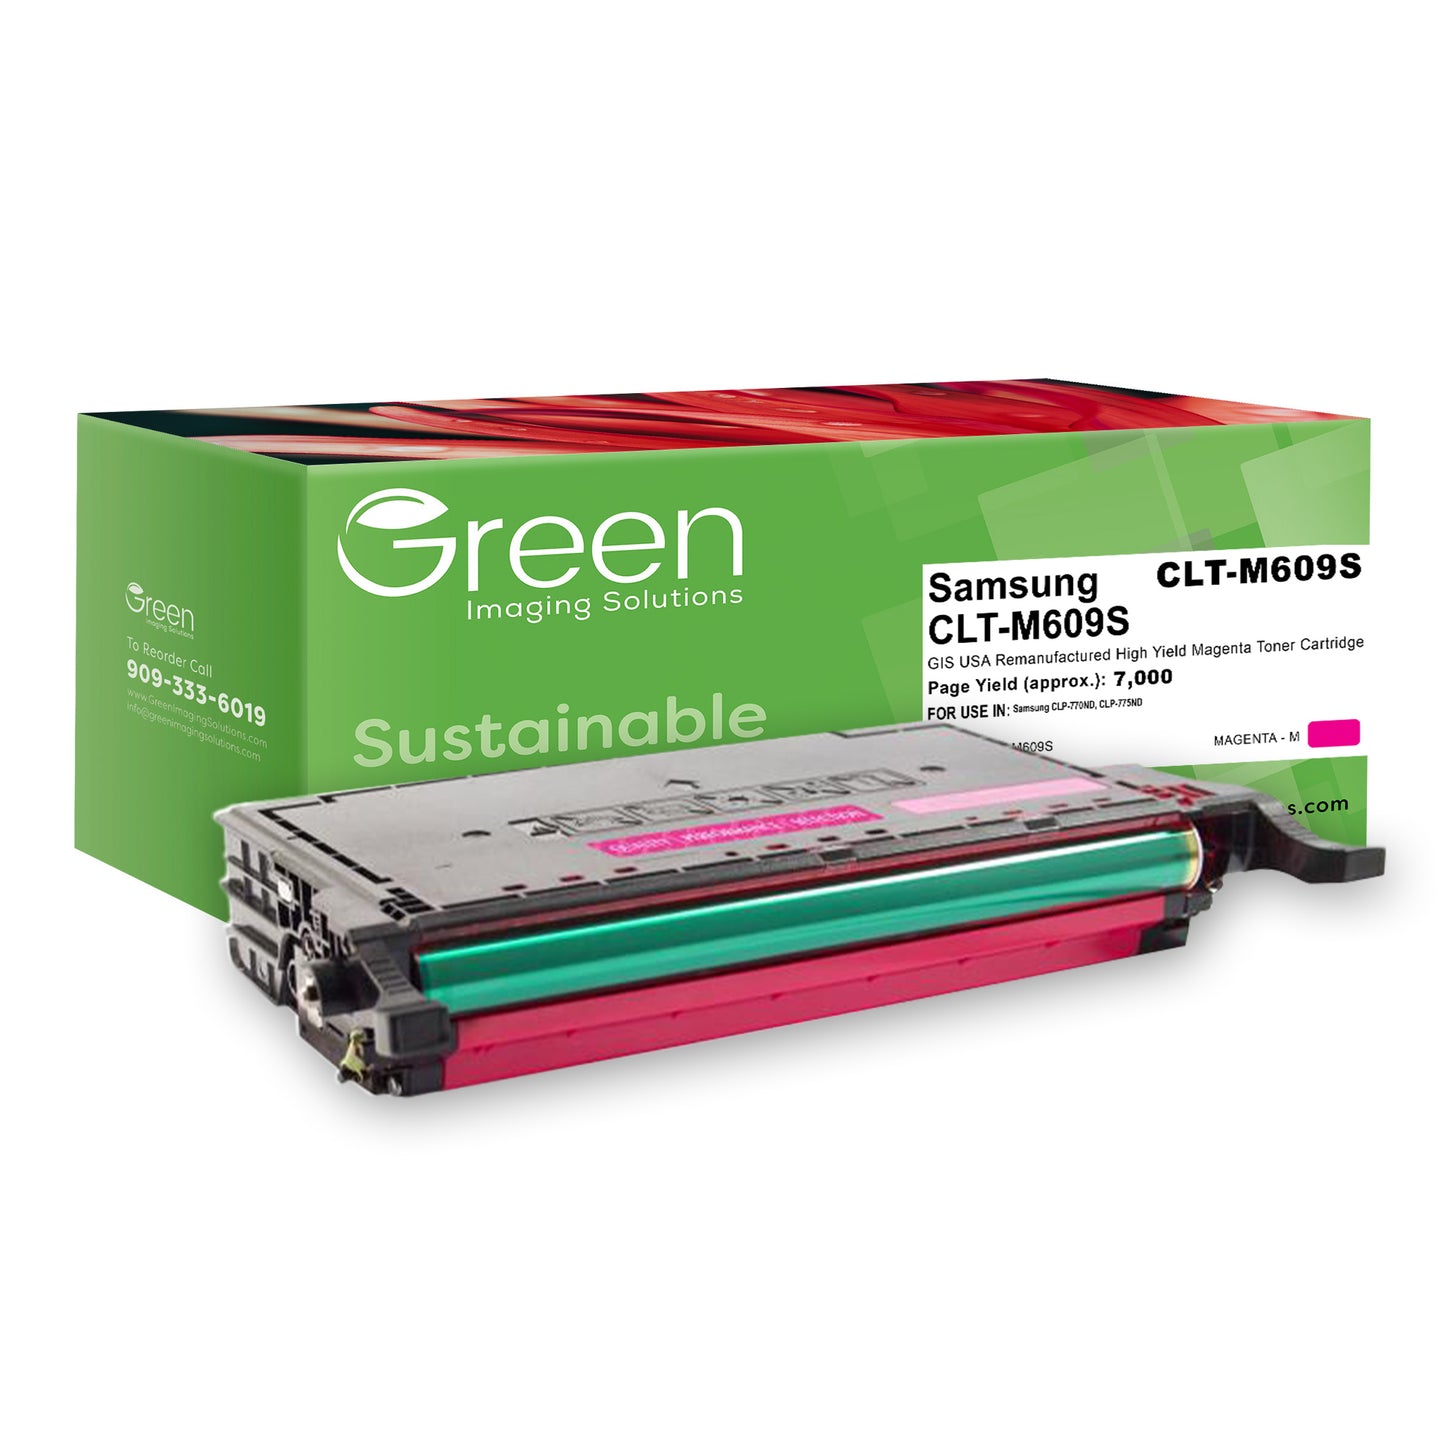 Green Imaging Solutions USA Remanufactured Magenta Toner Cartridge for Samsung CLT-M609S